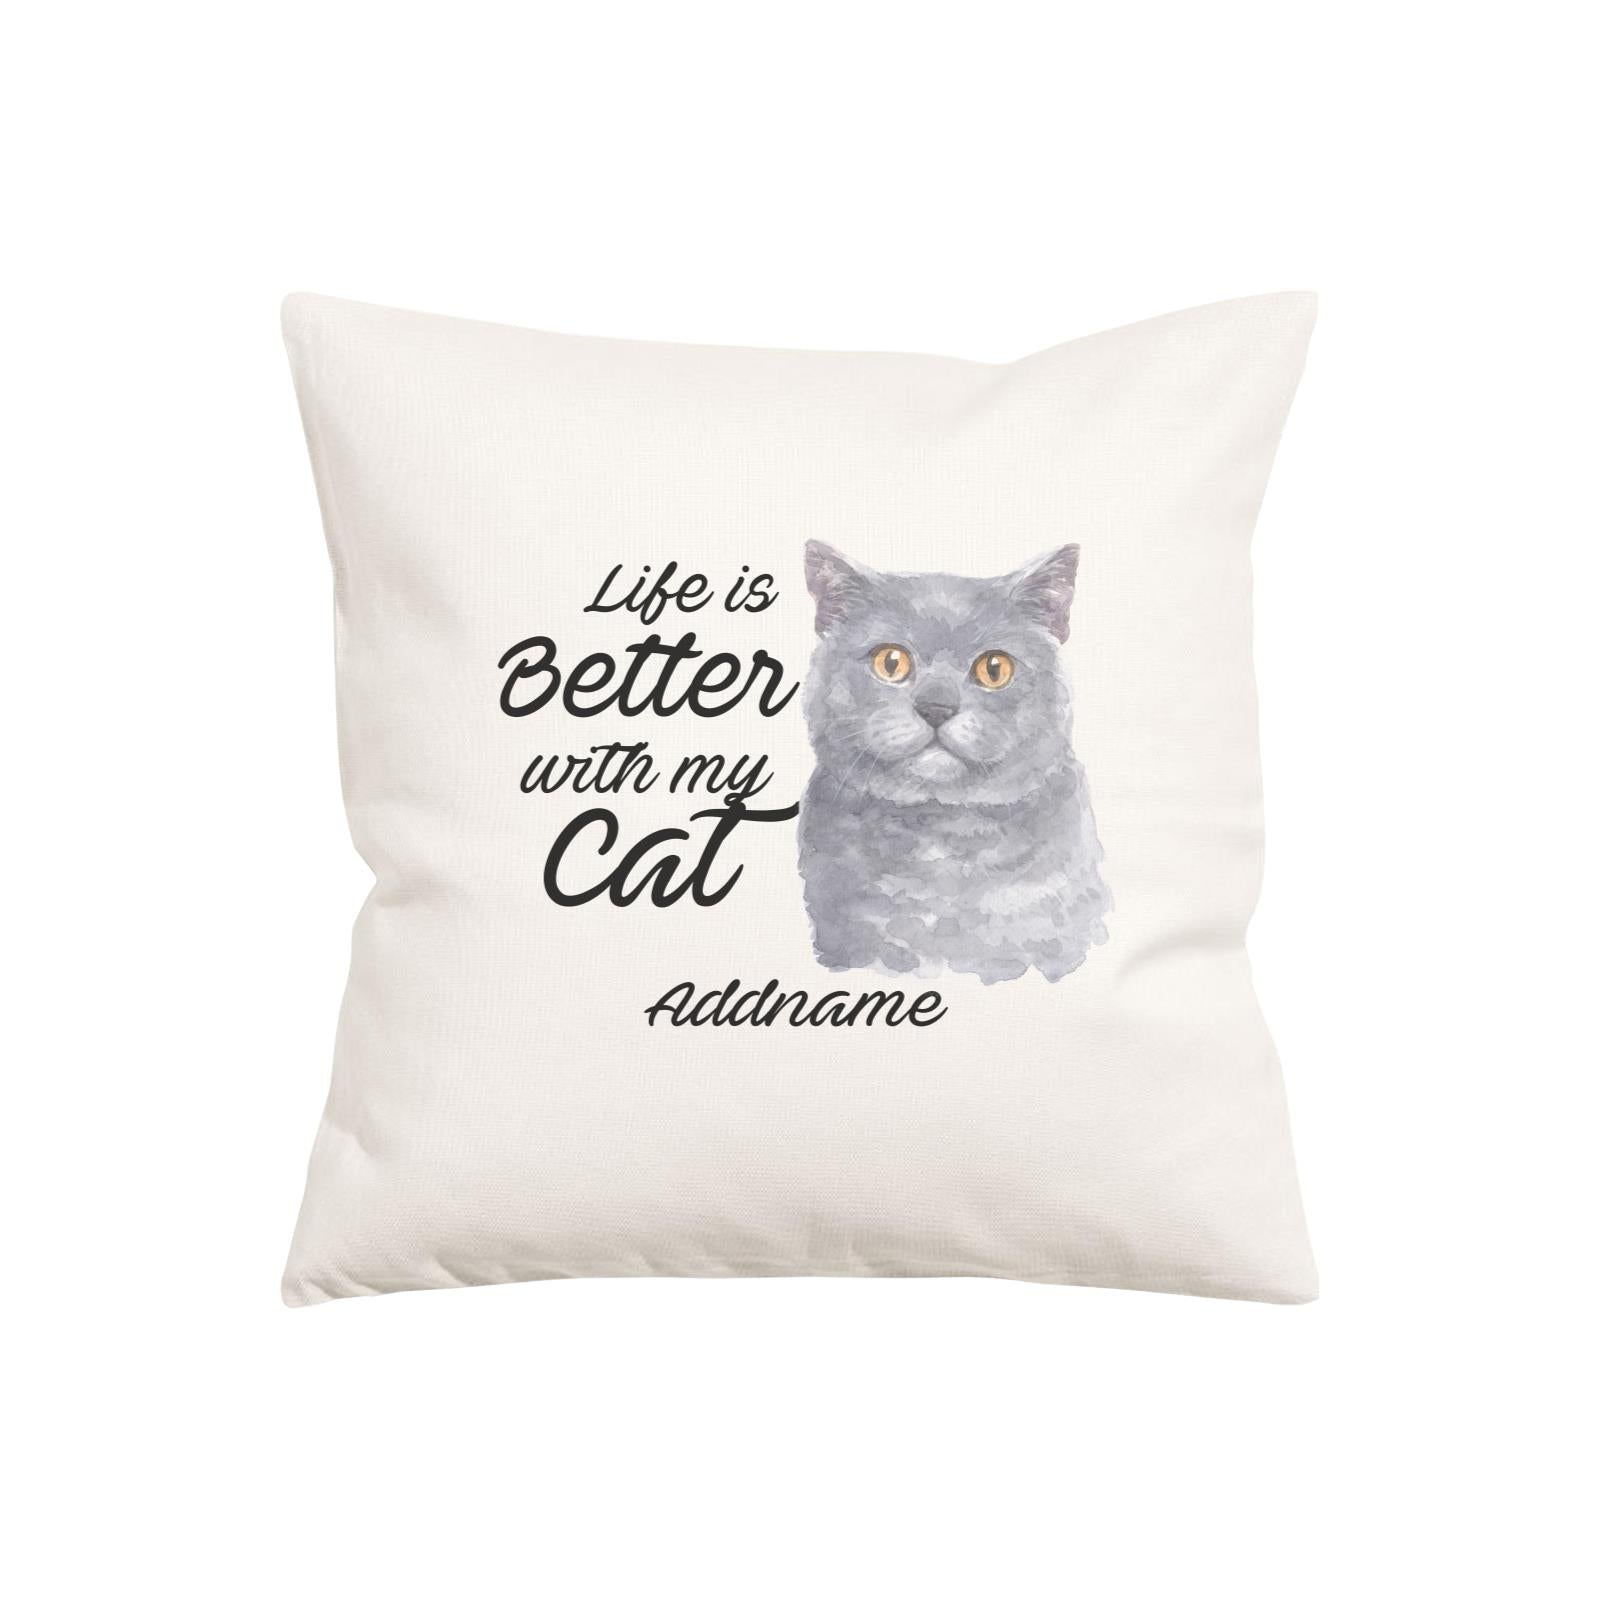 Watercolor Life is Better With My Cat British Shorthair Grey Addname Pillow Cushion